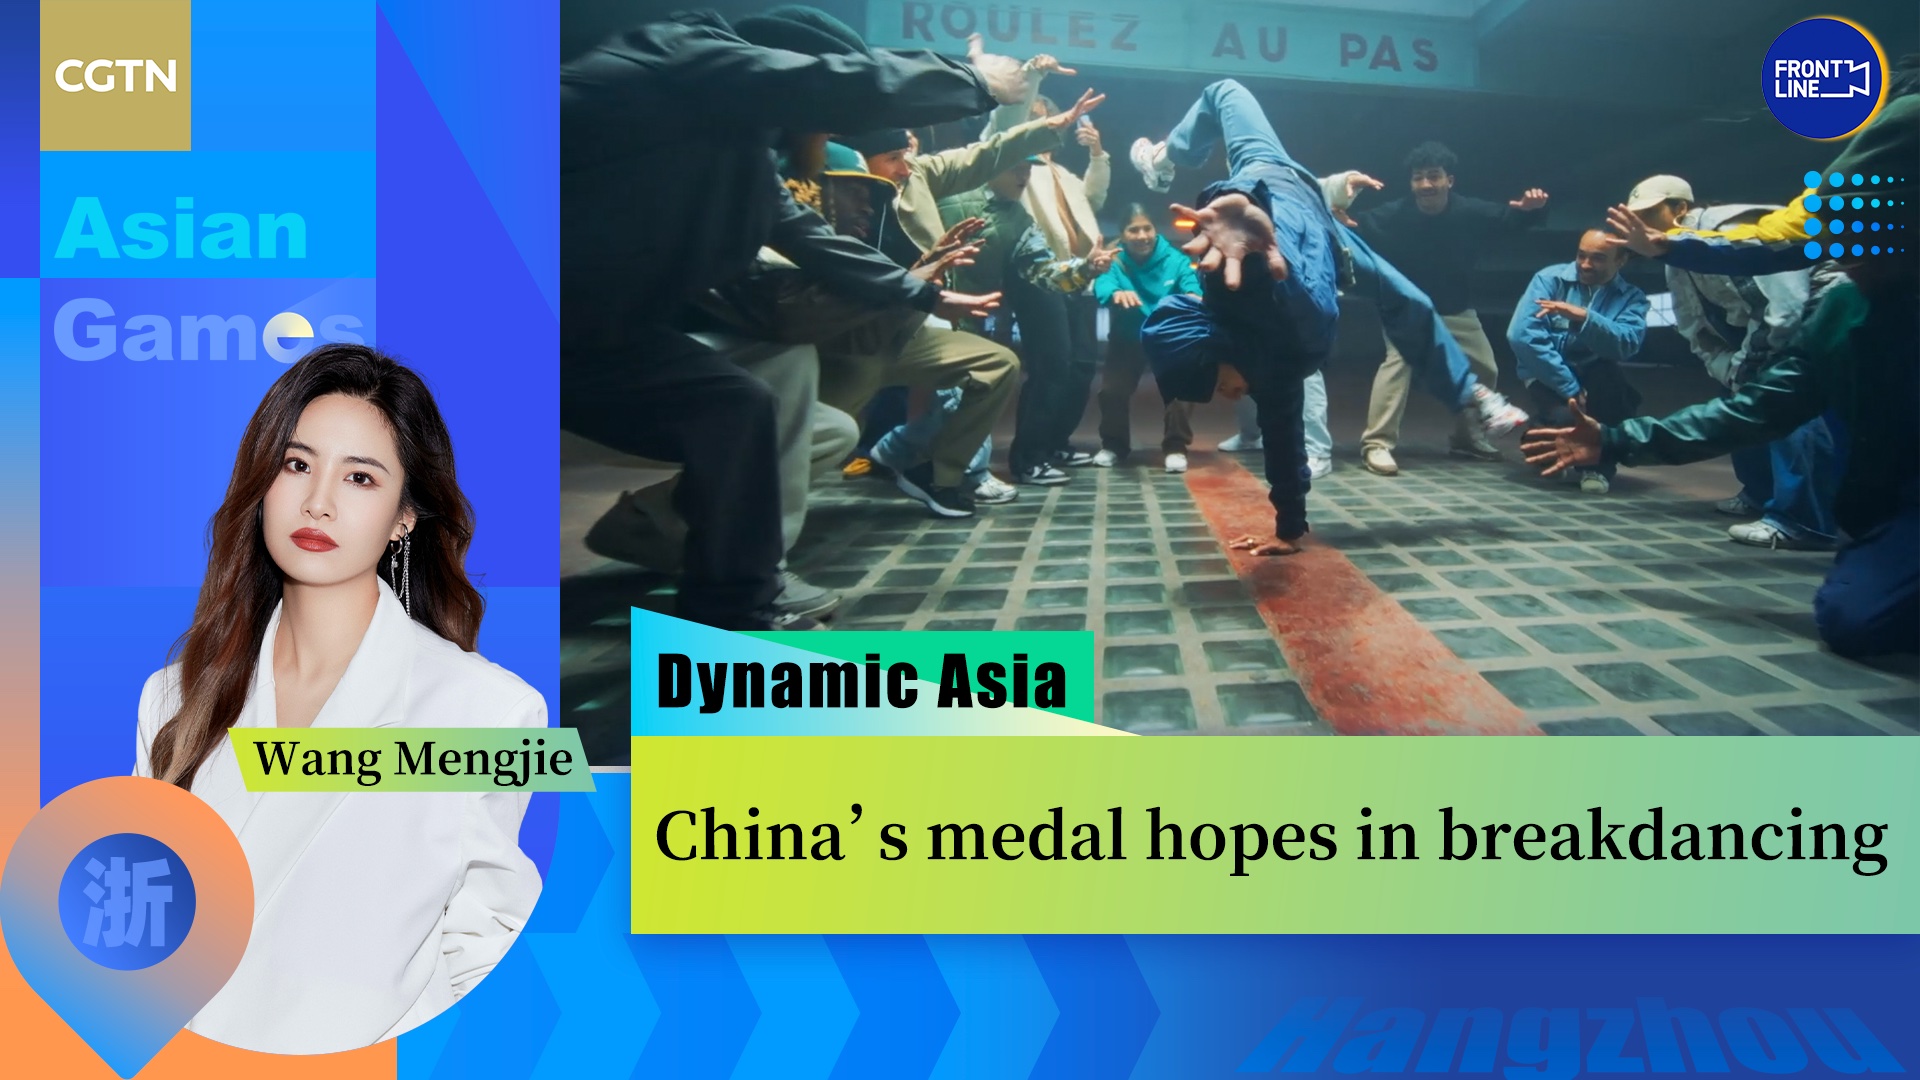 China's breakdancing medal hopes for Hangzhou